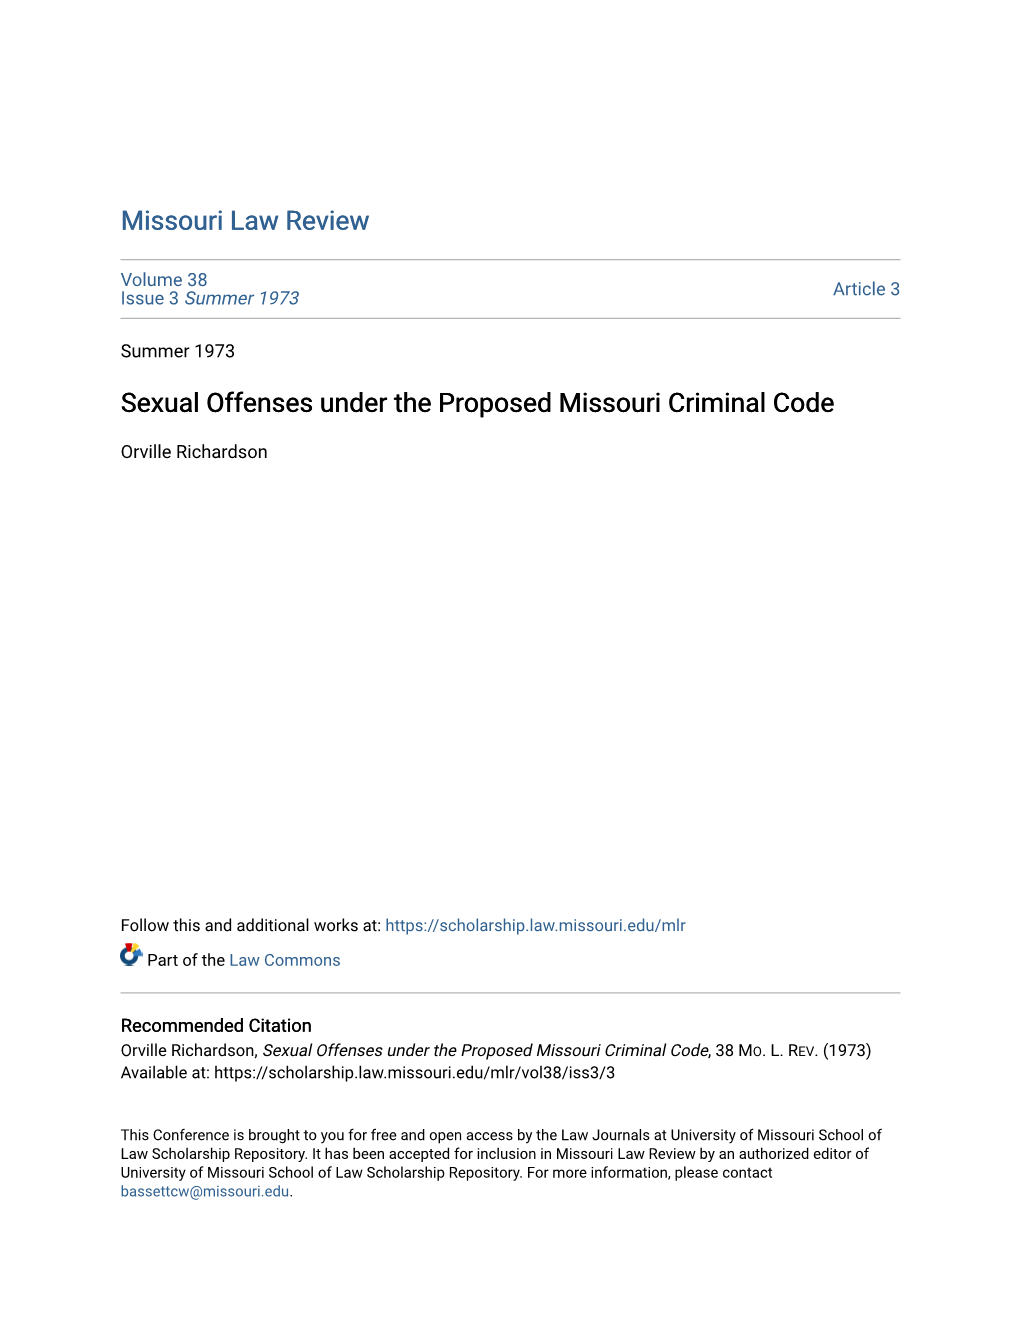 Sexual Offenses Under the Proposed Missouri Criminal Code